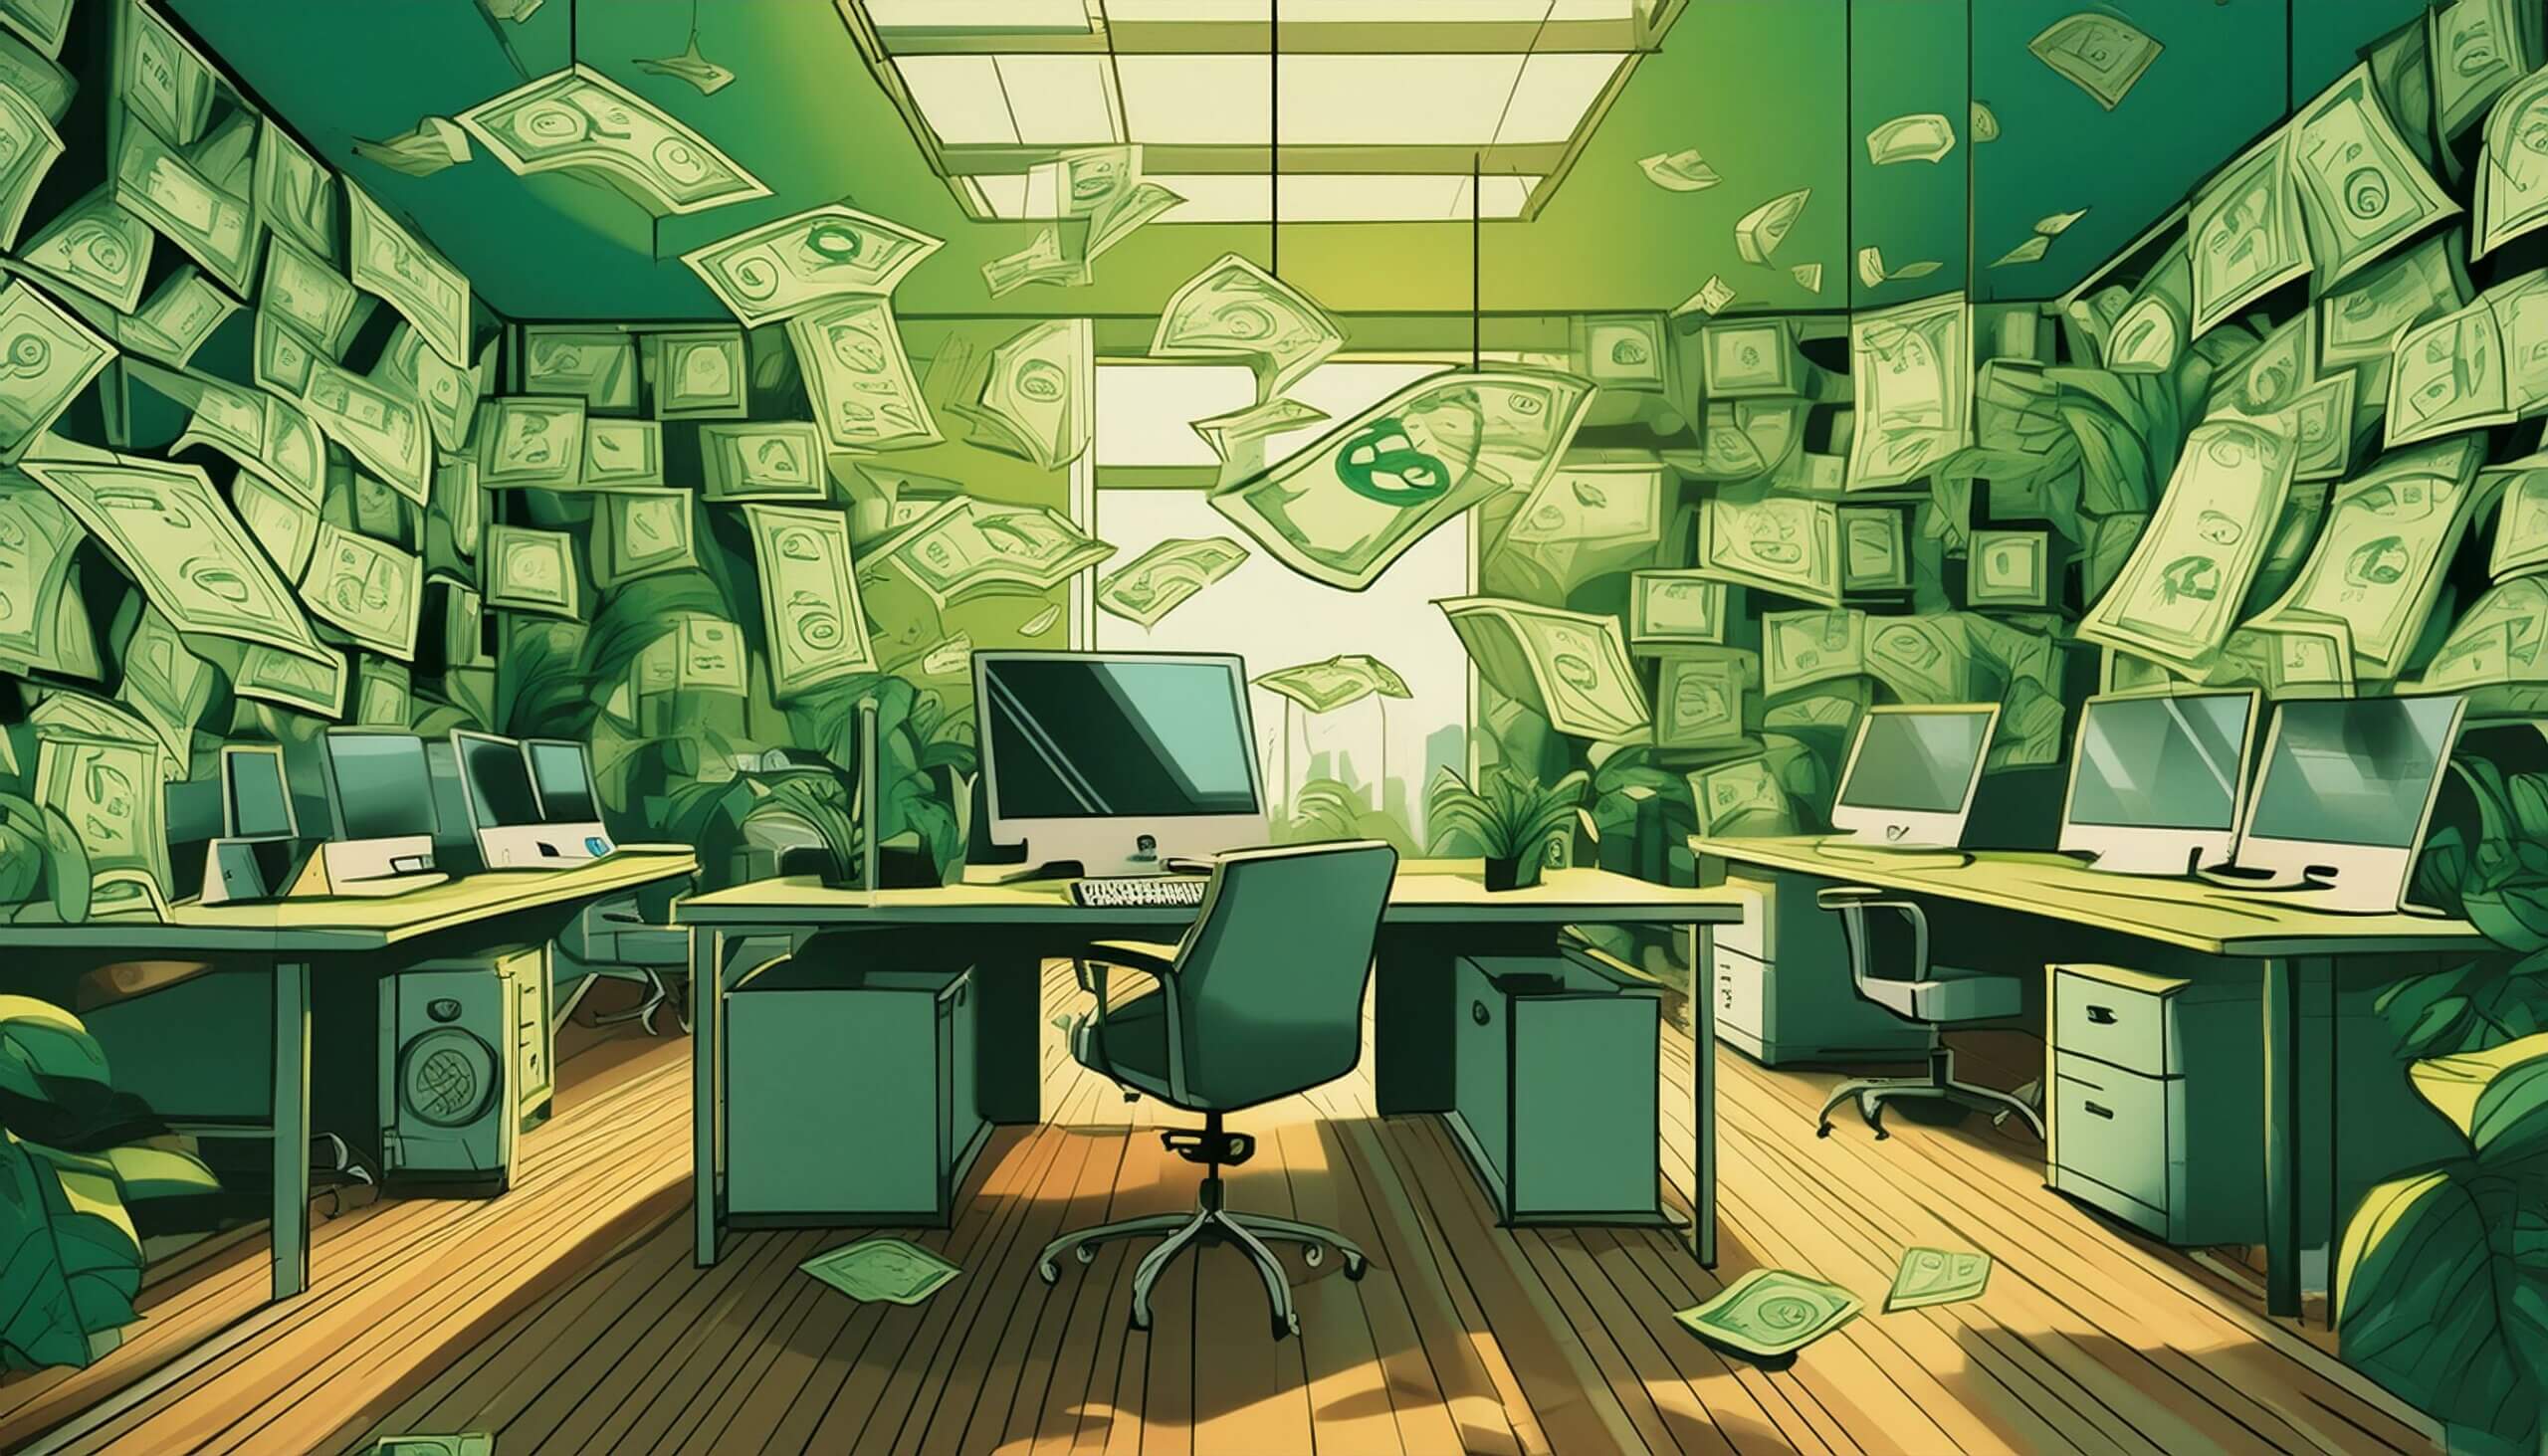 Abstract image of User Experience Designer's office space flooded with money